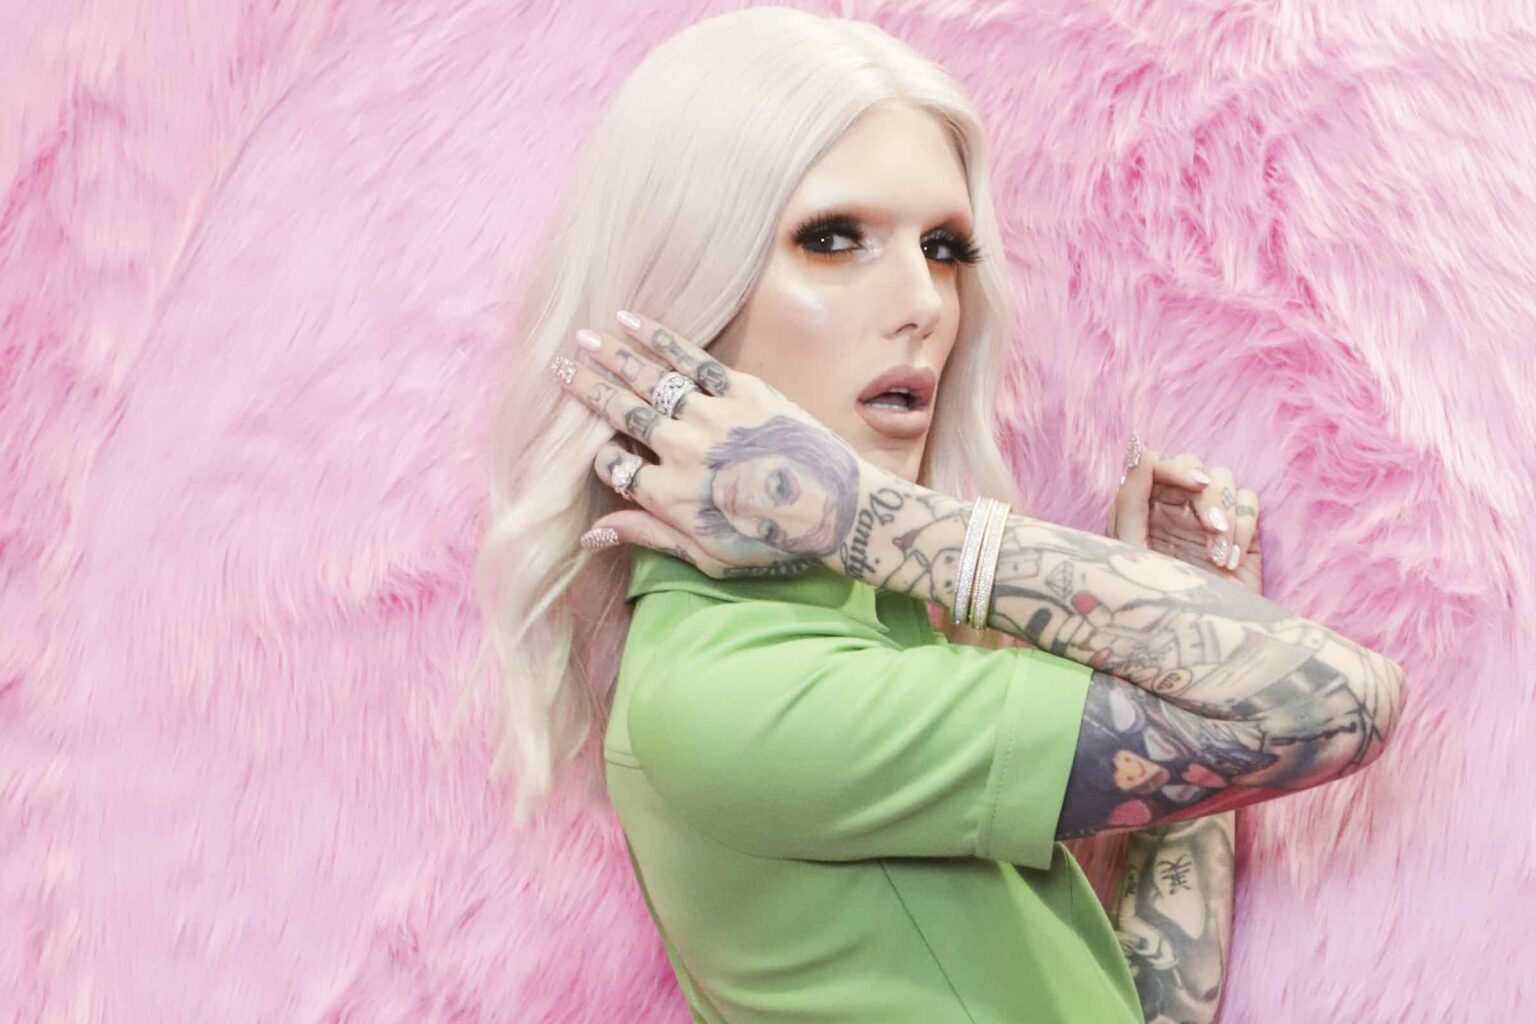 Is Jeffree Star scamming the government? Discover why Jeffree Star took out a PPP loan despite his massive net worth.